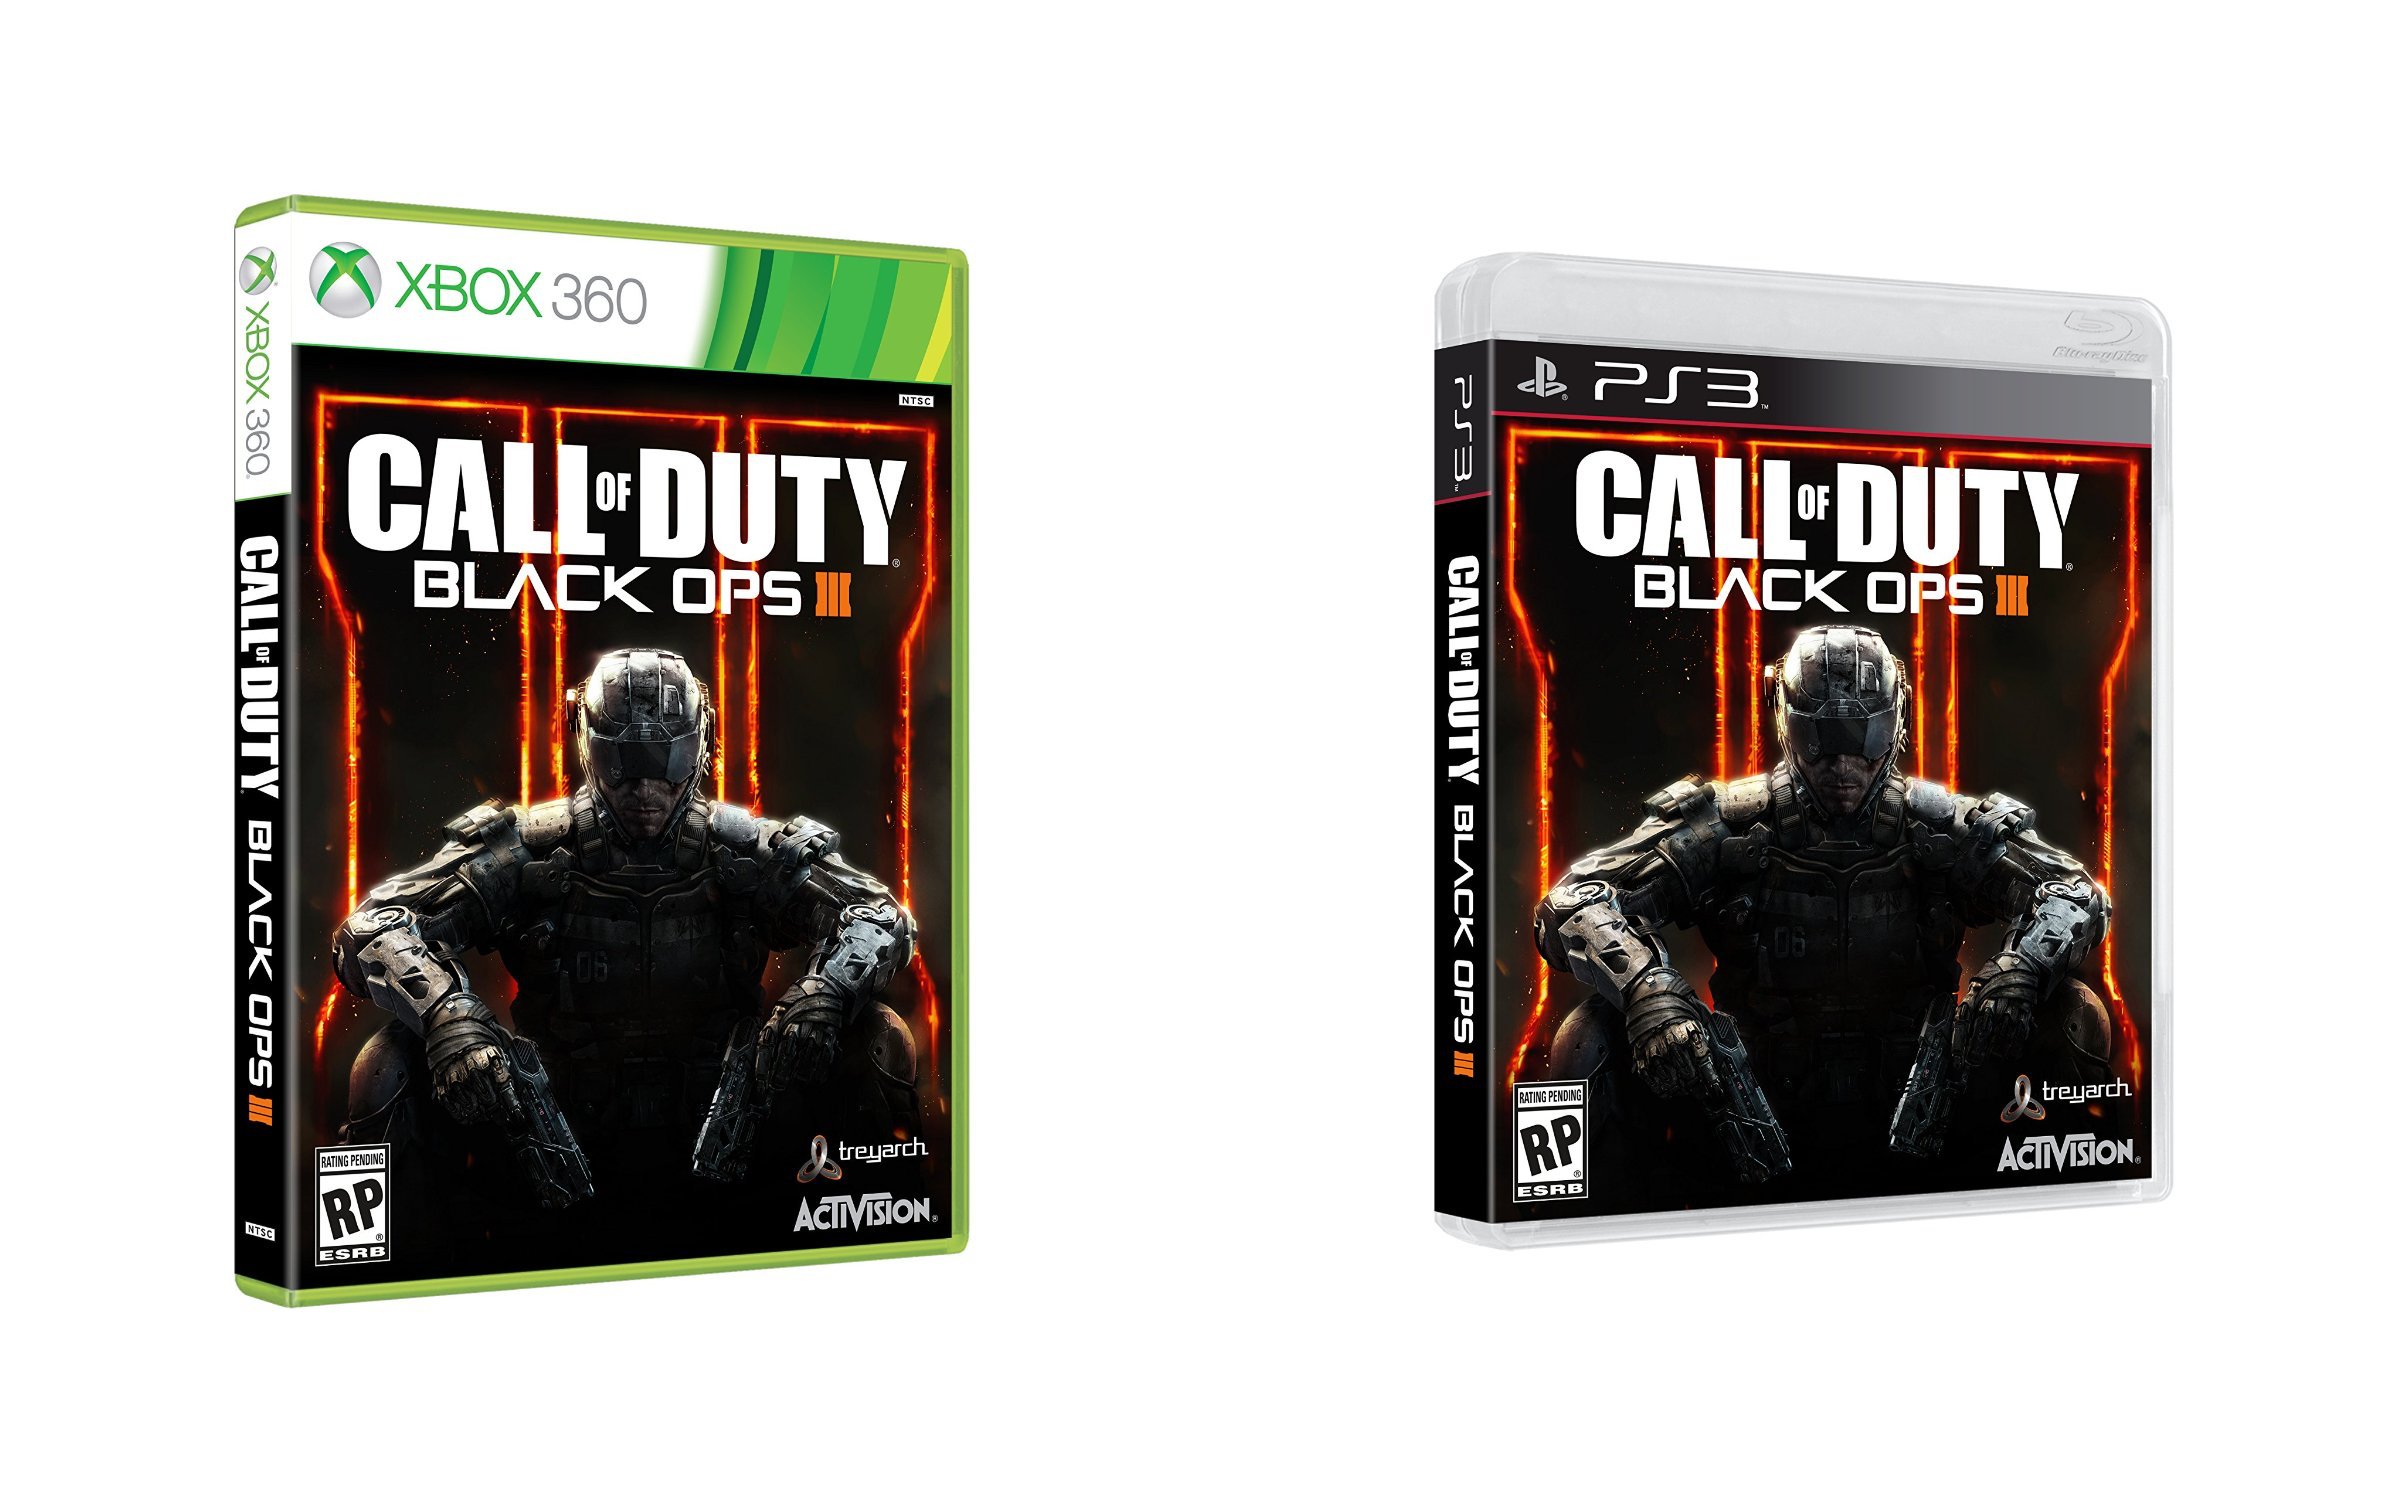 New information about which consoles get the Black Ops 3 release.